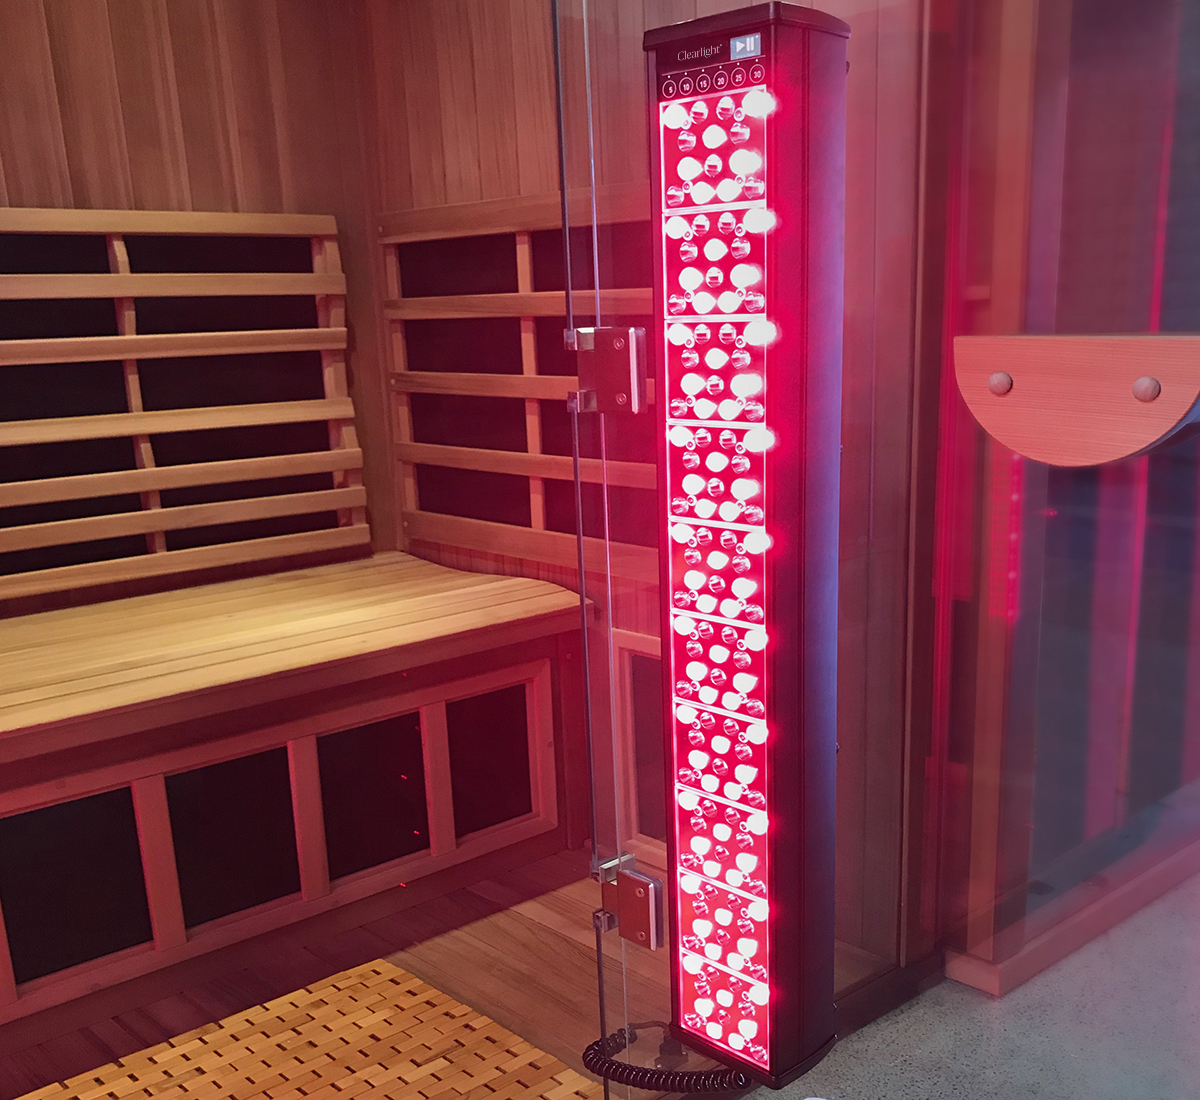 red light being used in a safe sauna